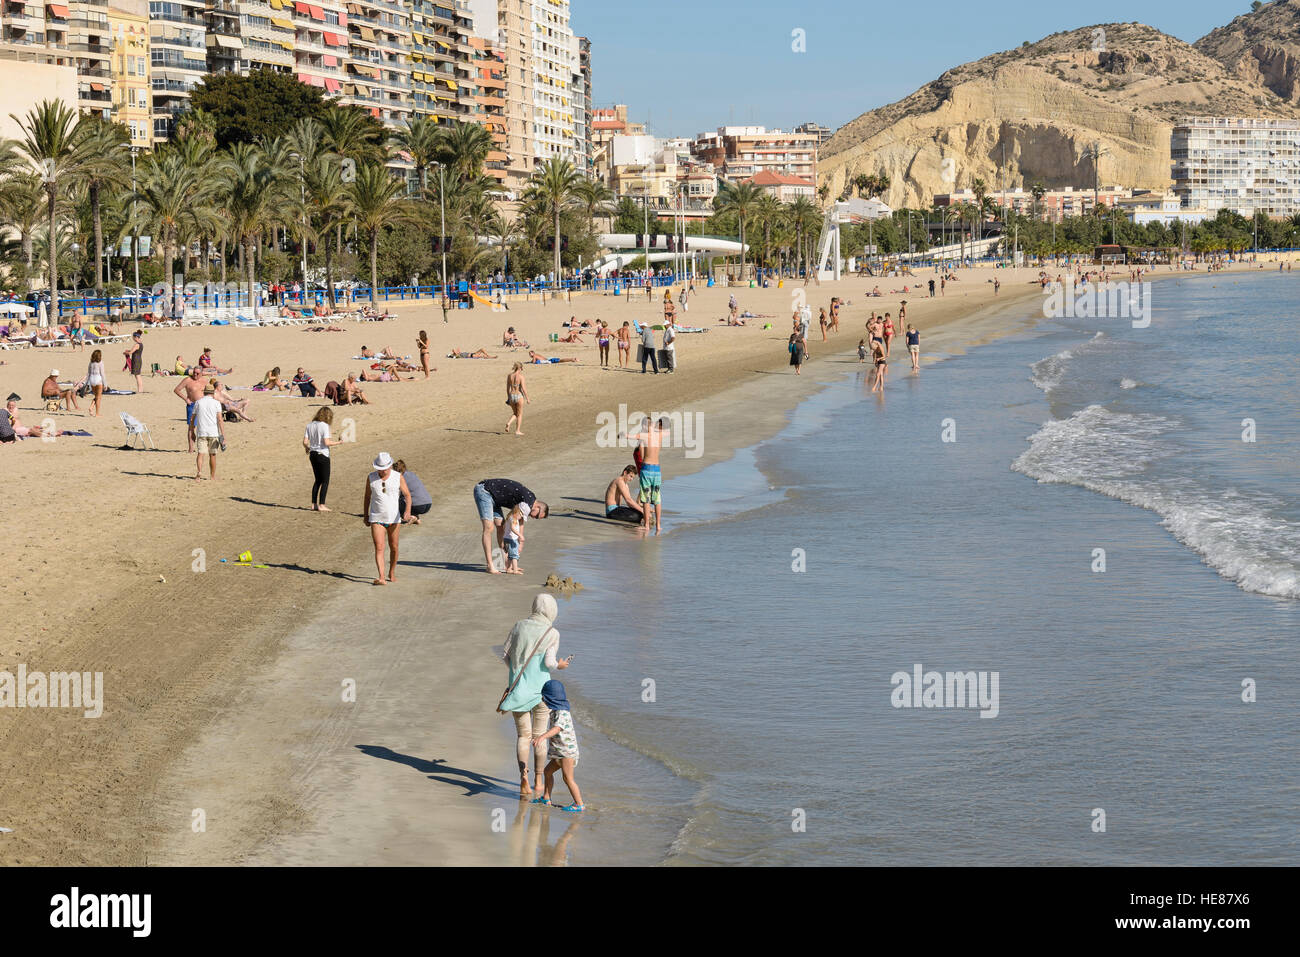 A Postiguet high view  in Alicante city, Spain. Stock Photo